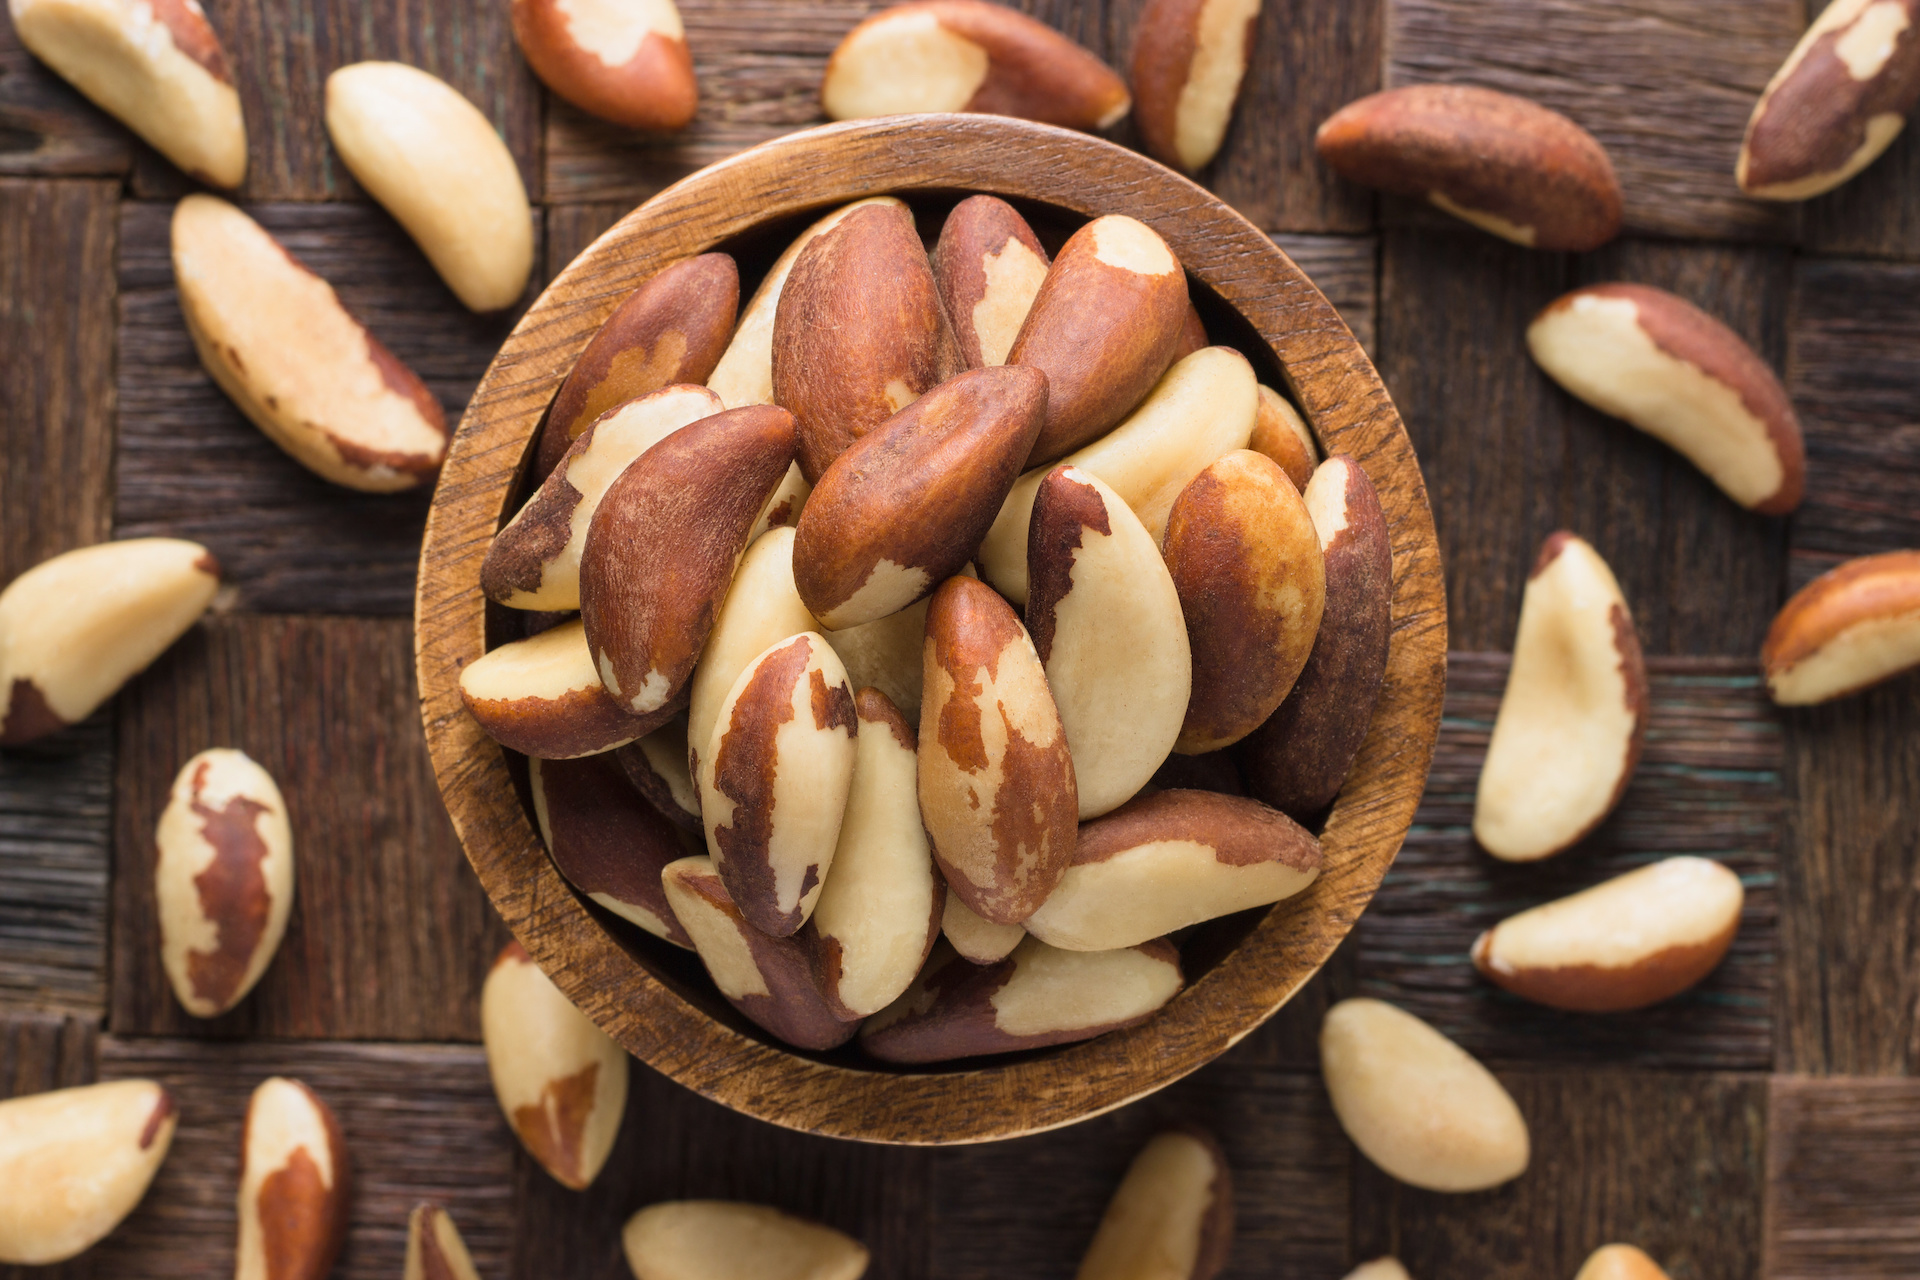 7 Proven Health Benefits of Brazil Nuts